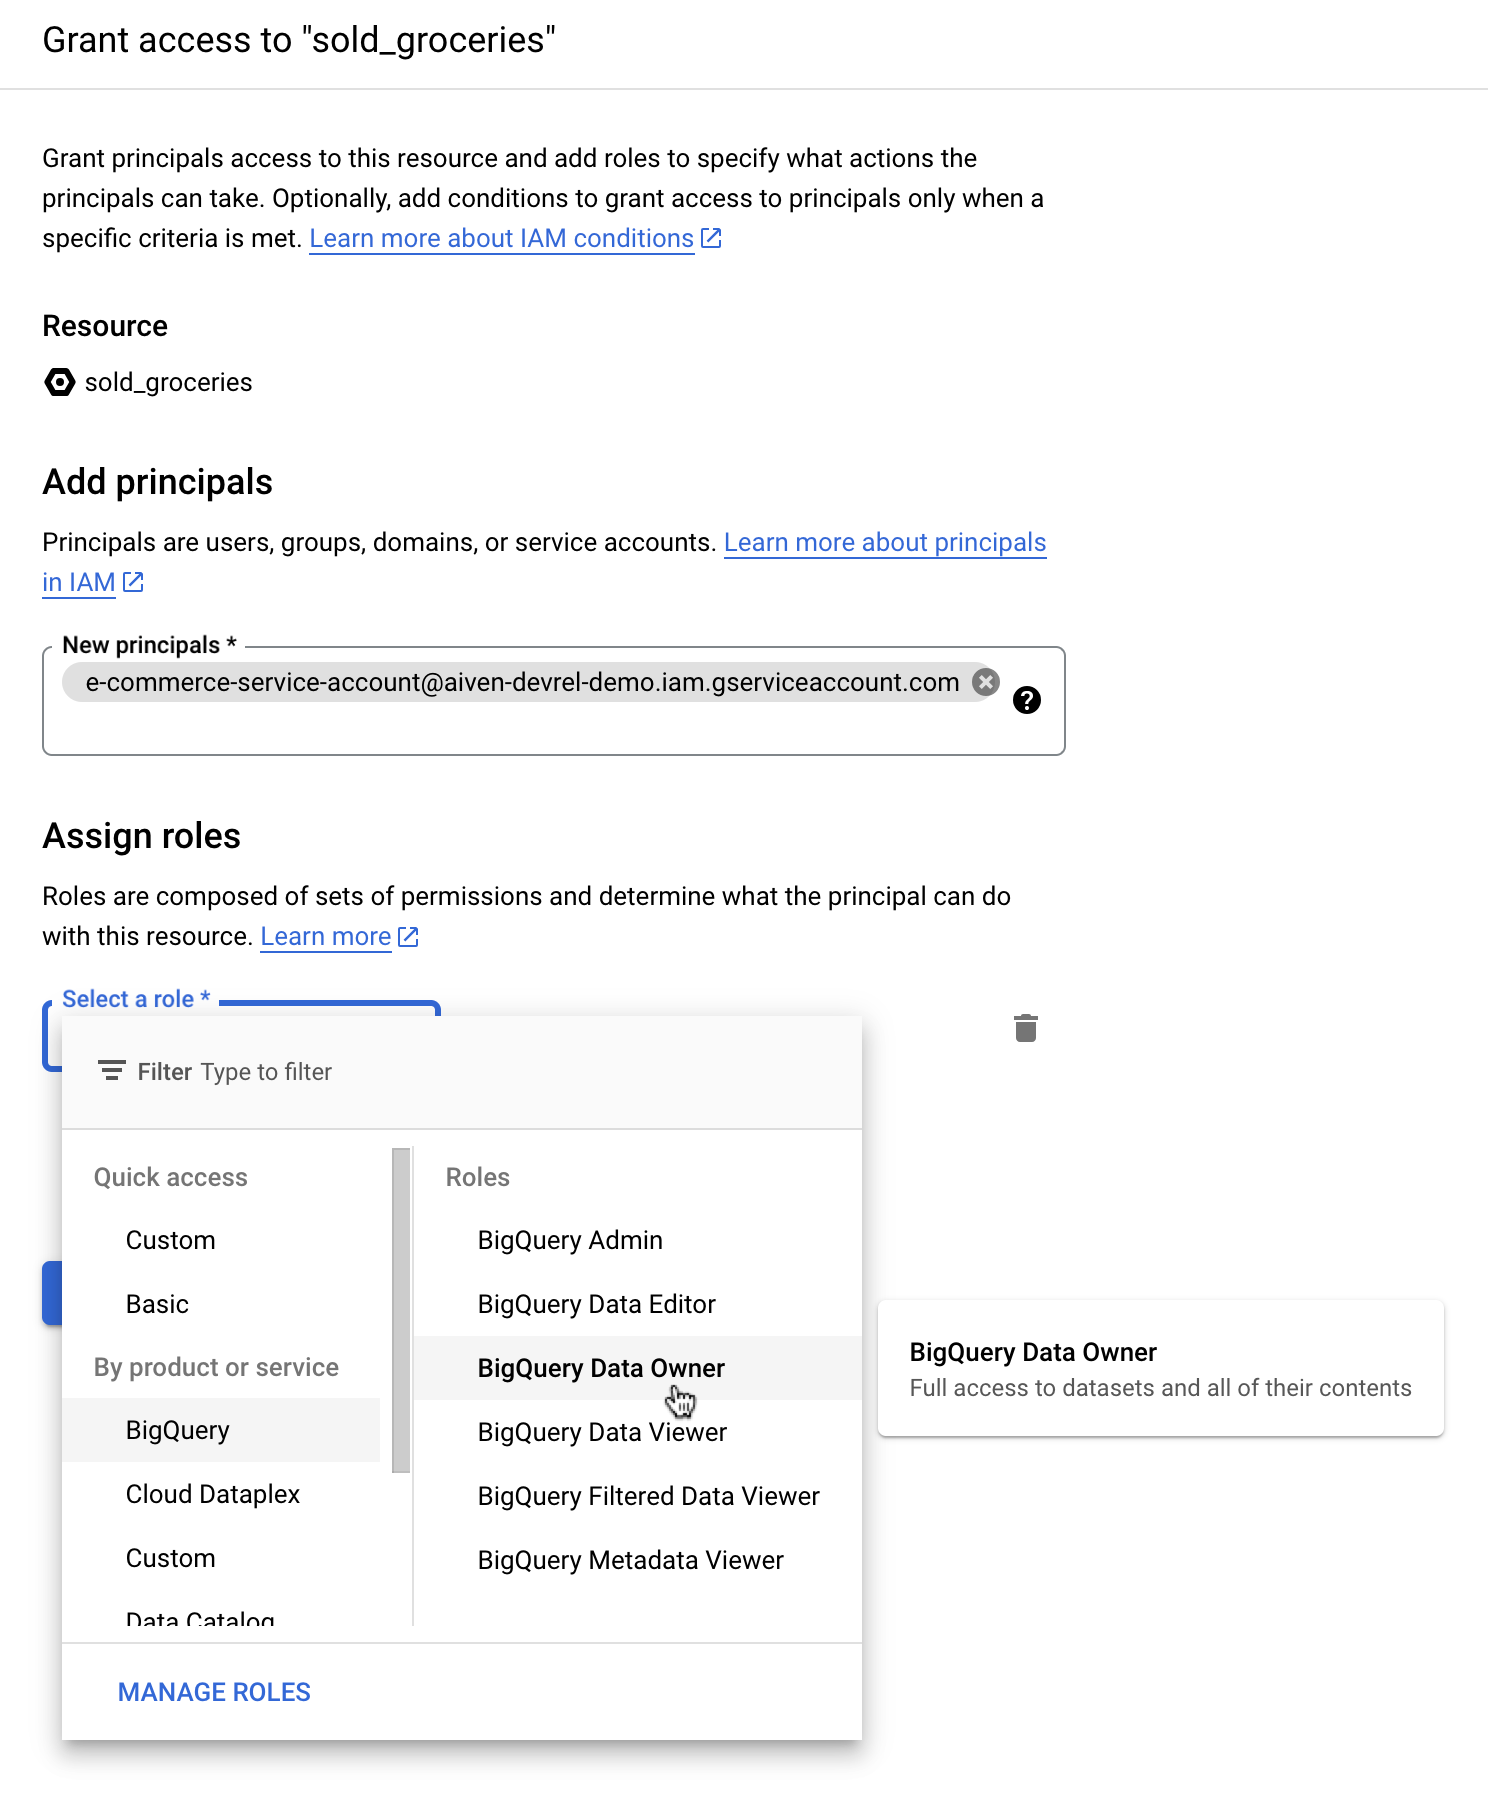 Granting access to sold_groceries by adding the new serice account as principal, and selecting BigQuery Data Owner as role